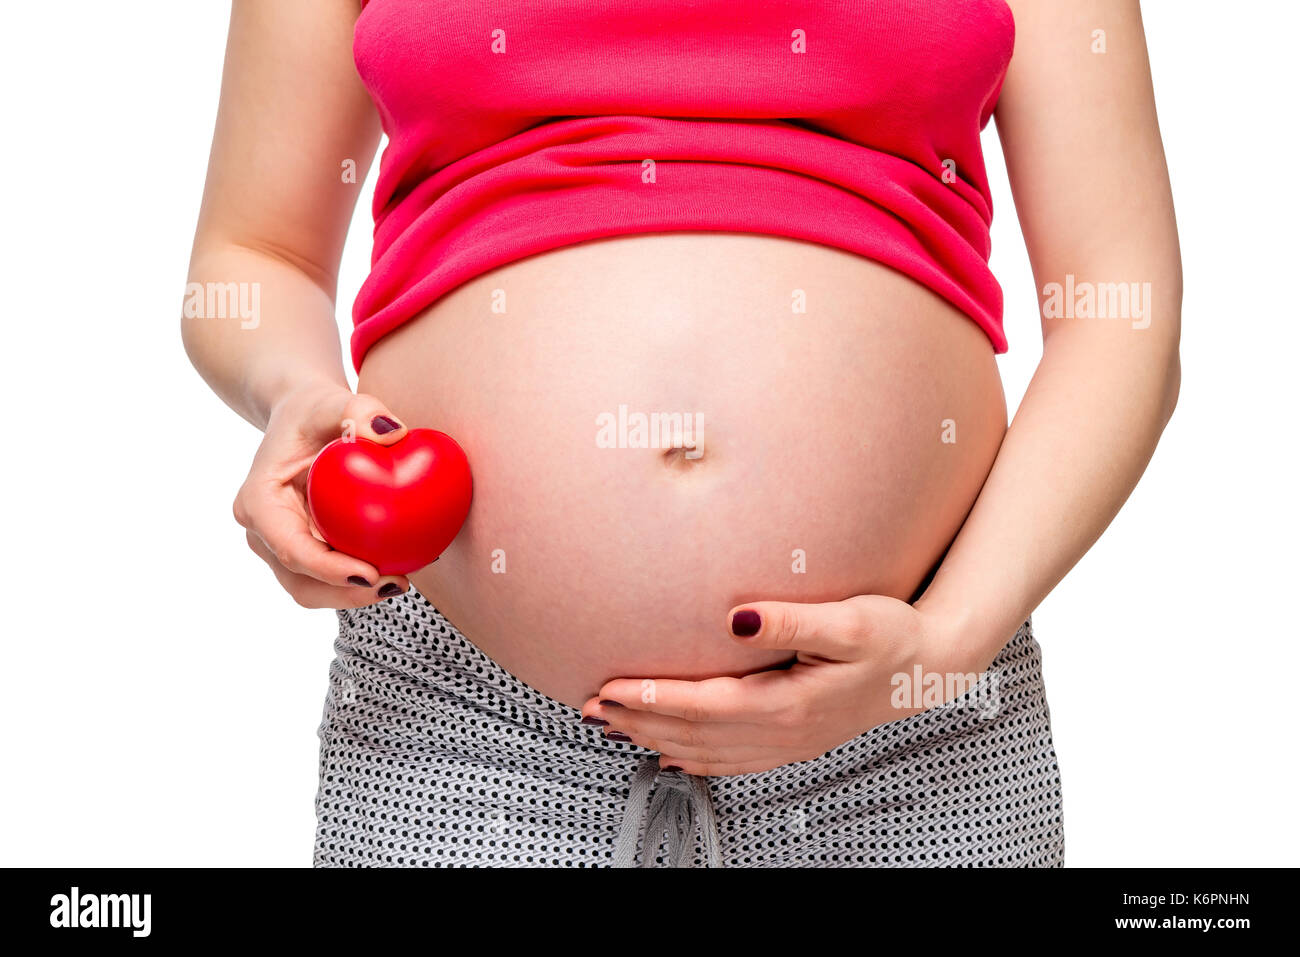 Close-up of the belly of a pregnant woman with a red heart shape - concept photo Stock Photo